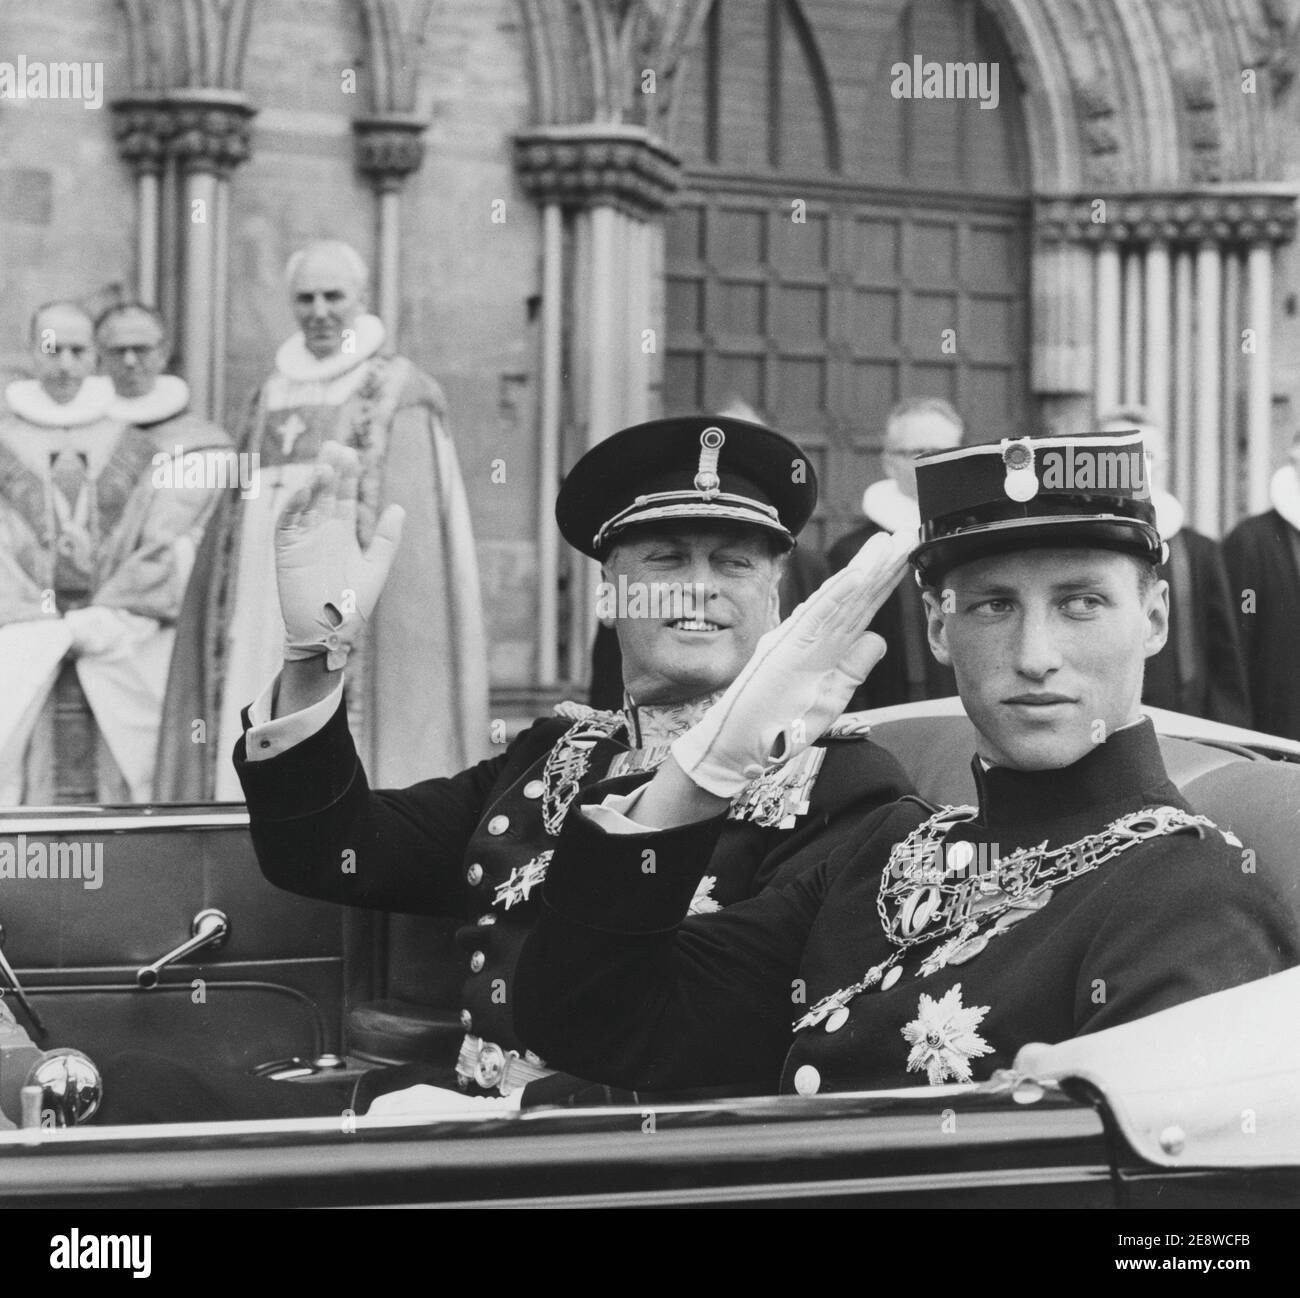 King Harald of Norway. Pictured with his father King Olav V on the day of his coronation becoming king, Trondheim june 22 1958. Stock Photo